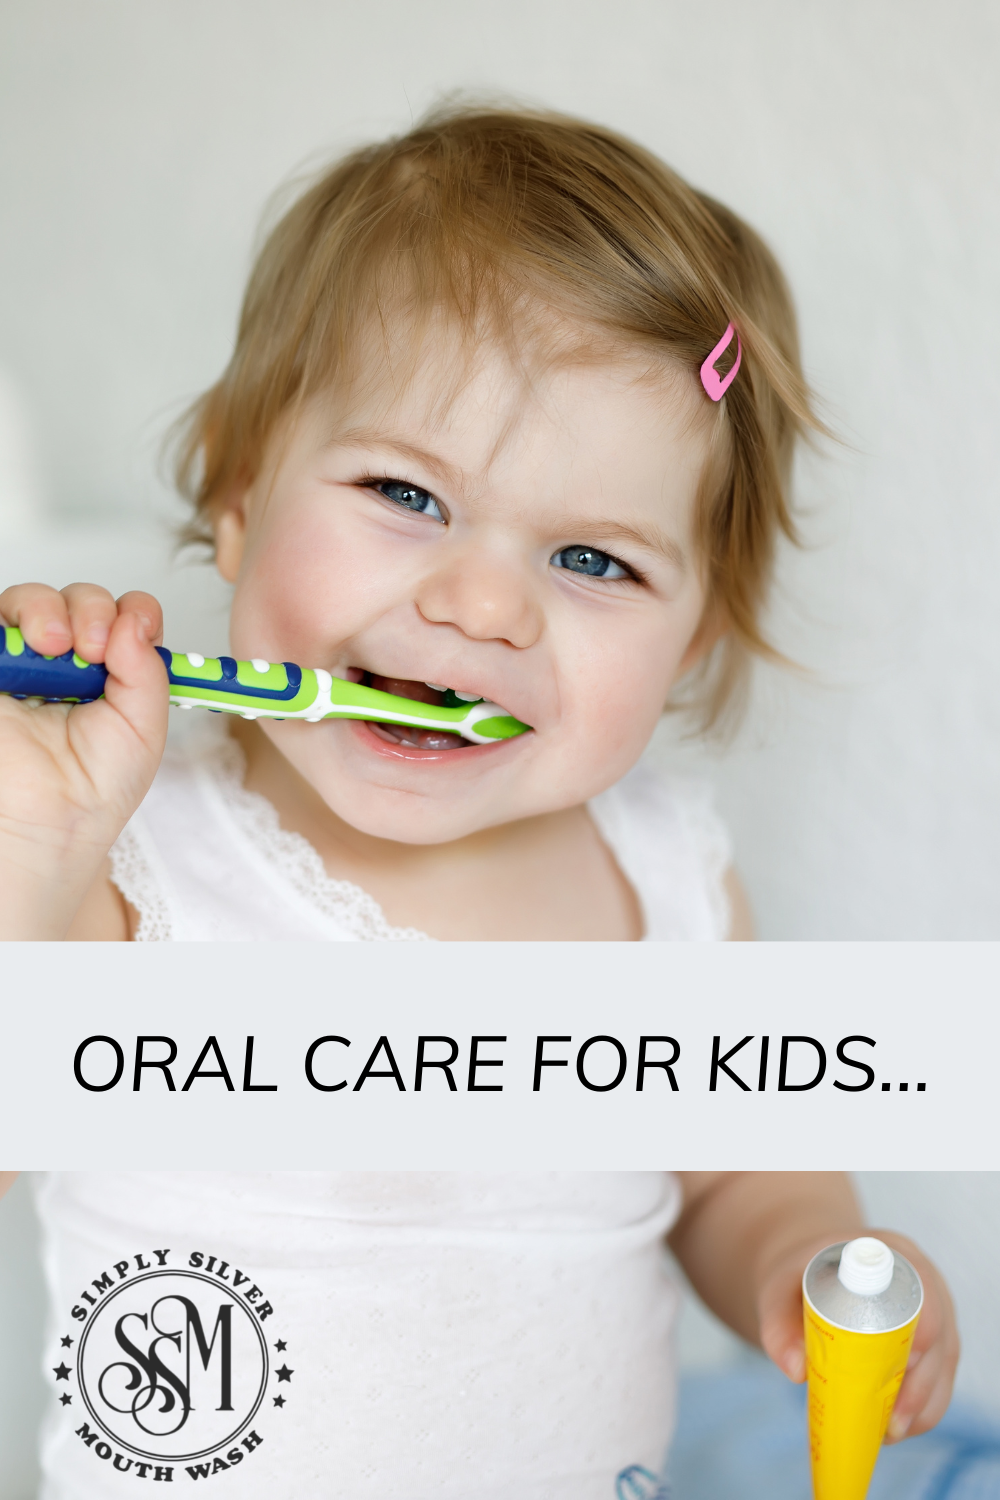 Oral care for kids